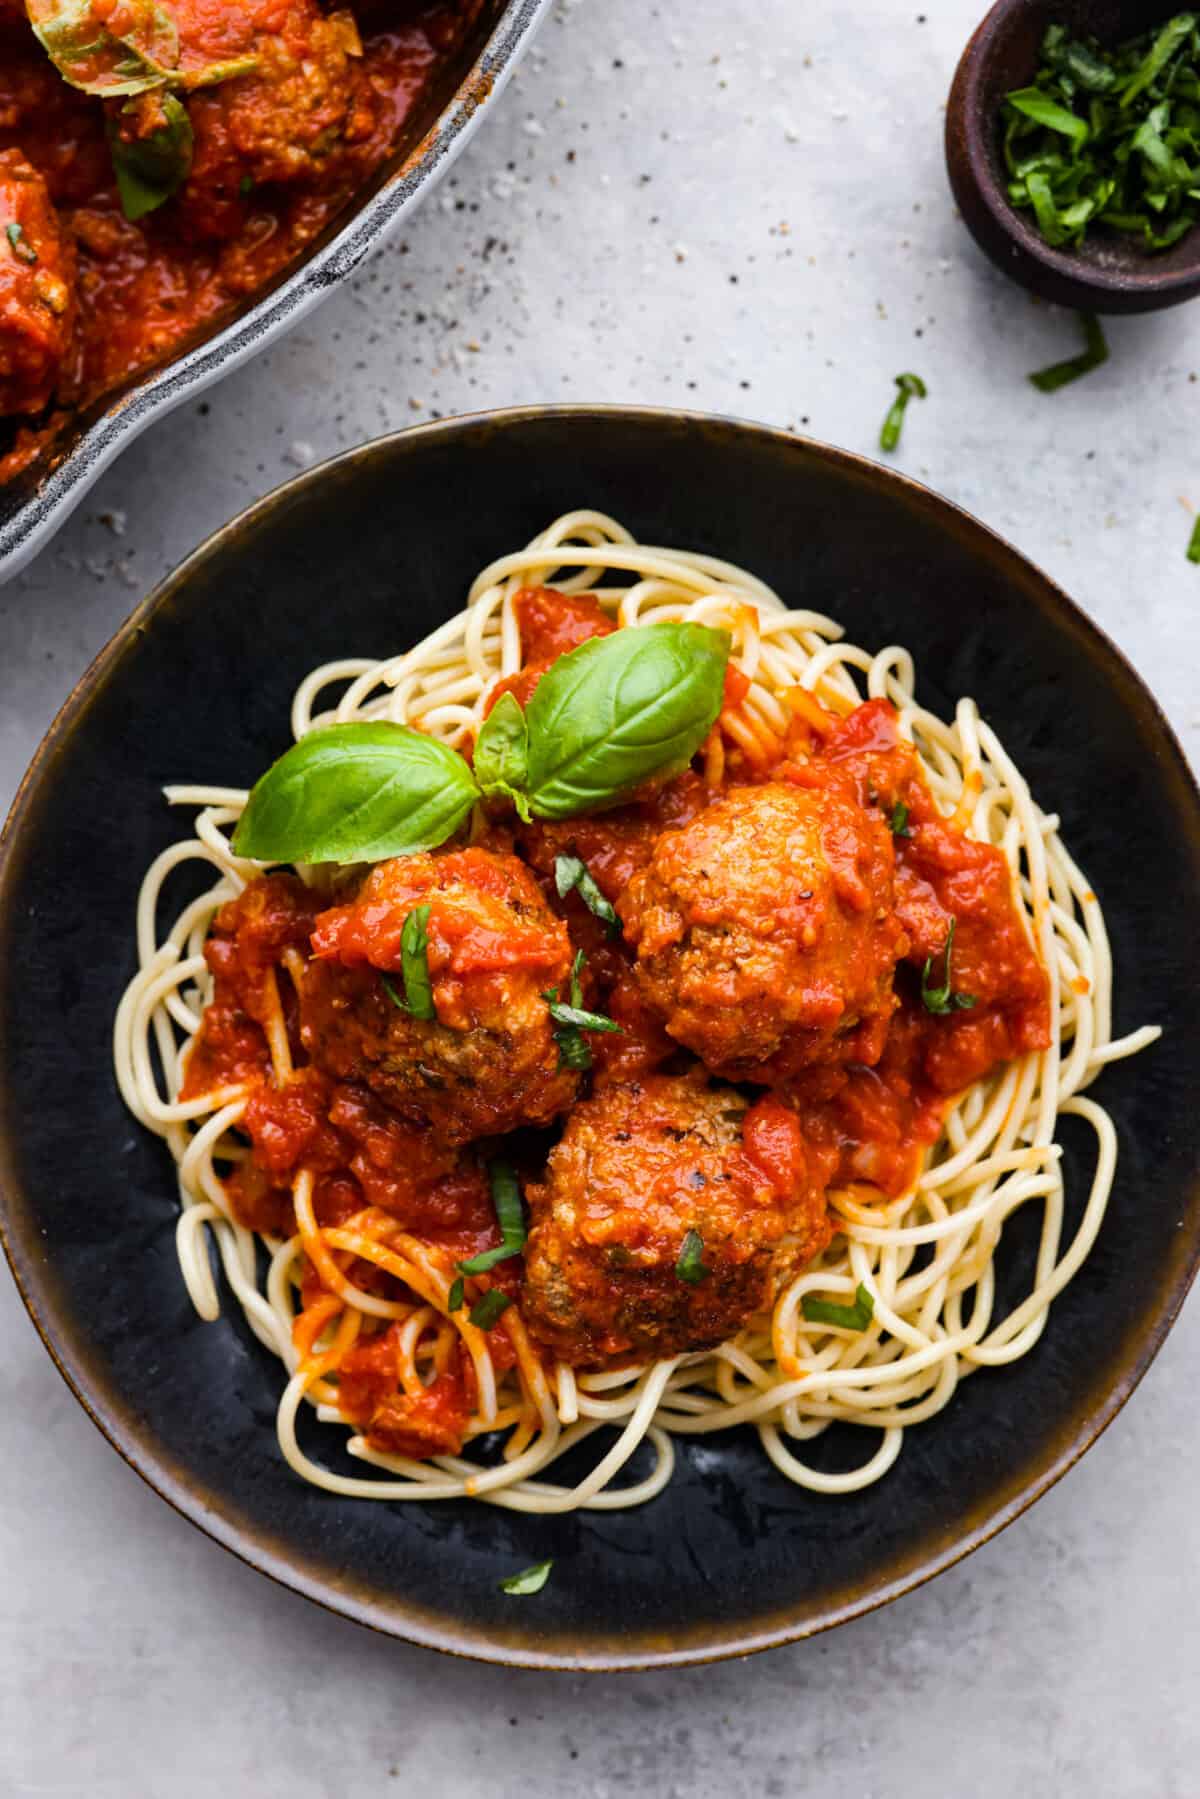 Top view of ricotta meatballs on a bed of spaghetti noodles in a black bowl.